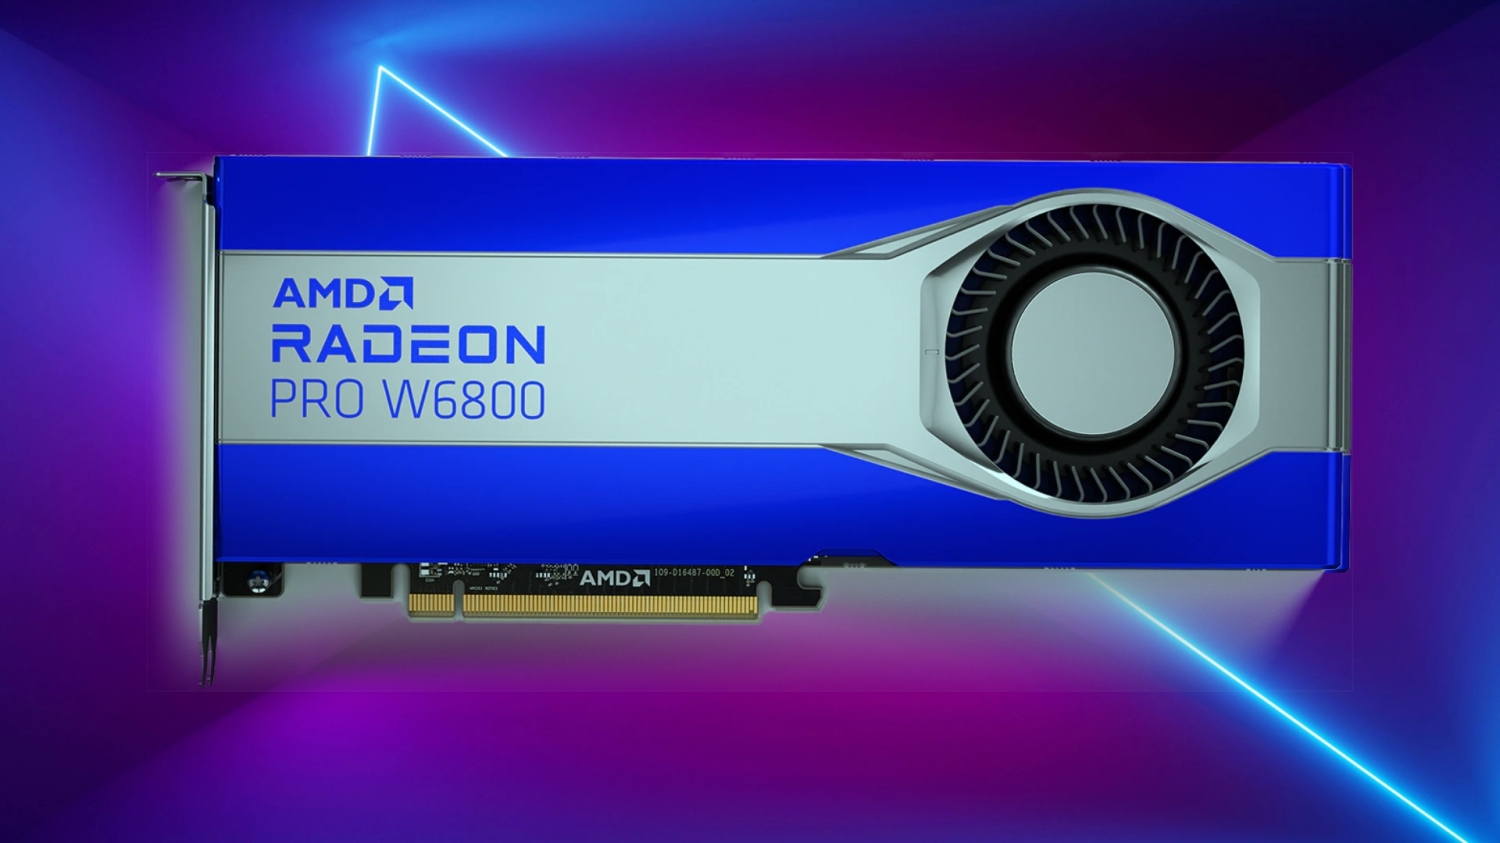 AMD outlines how GPU VRAM capacity matters ahead of the RTX 4070's